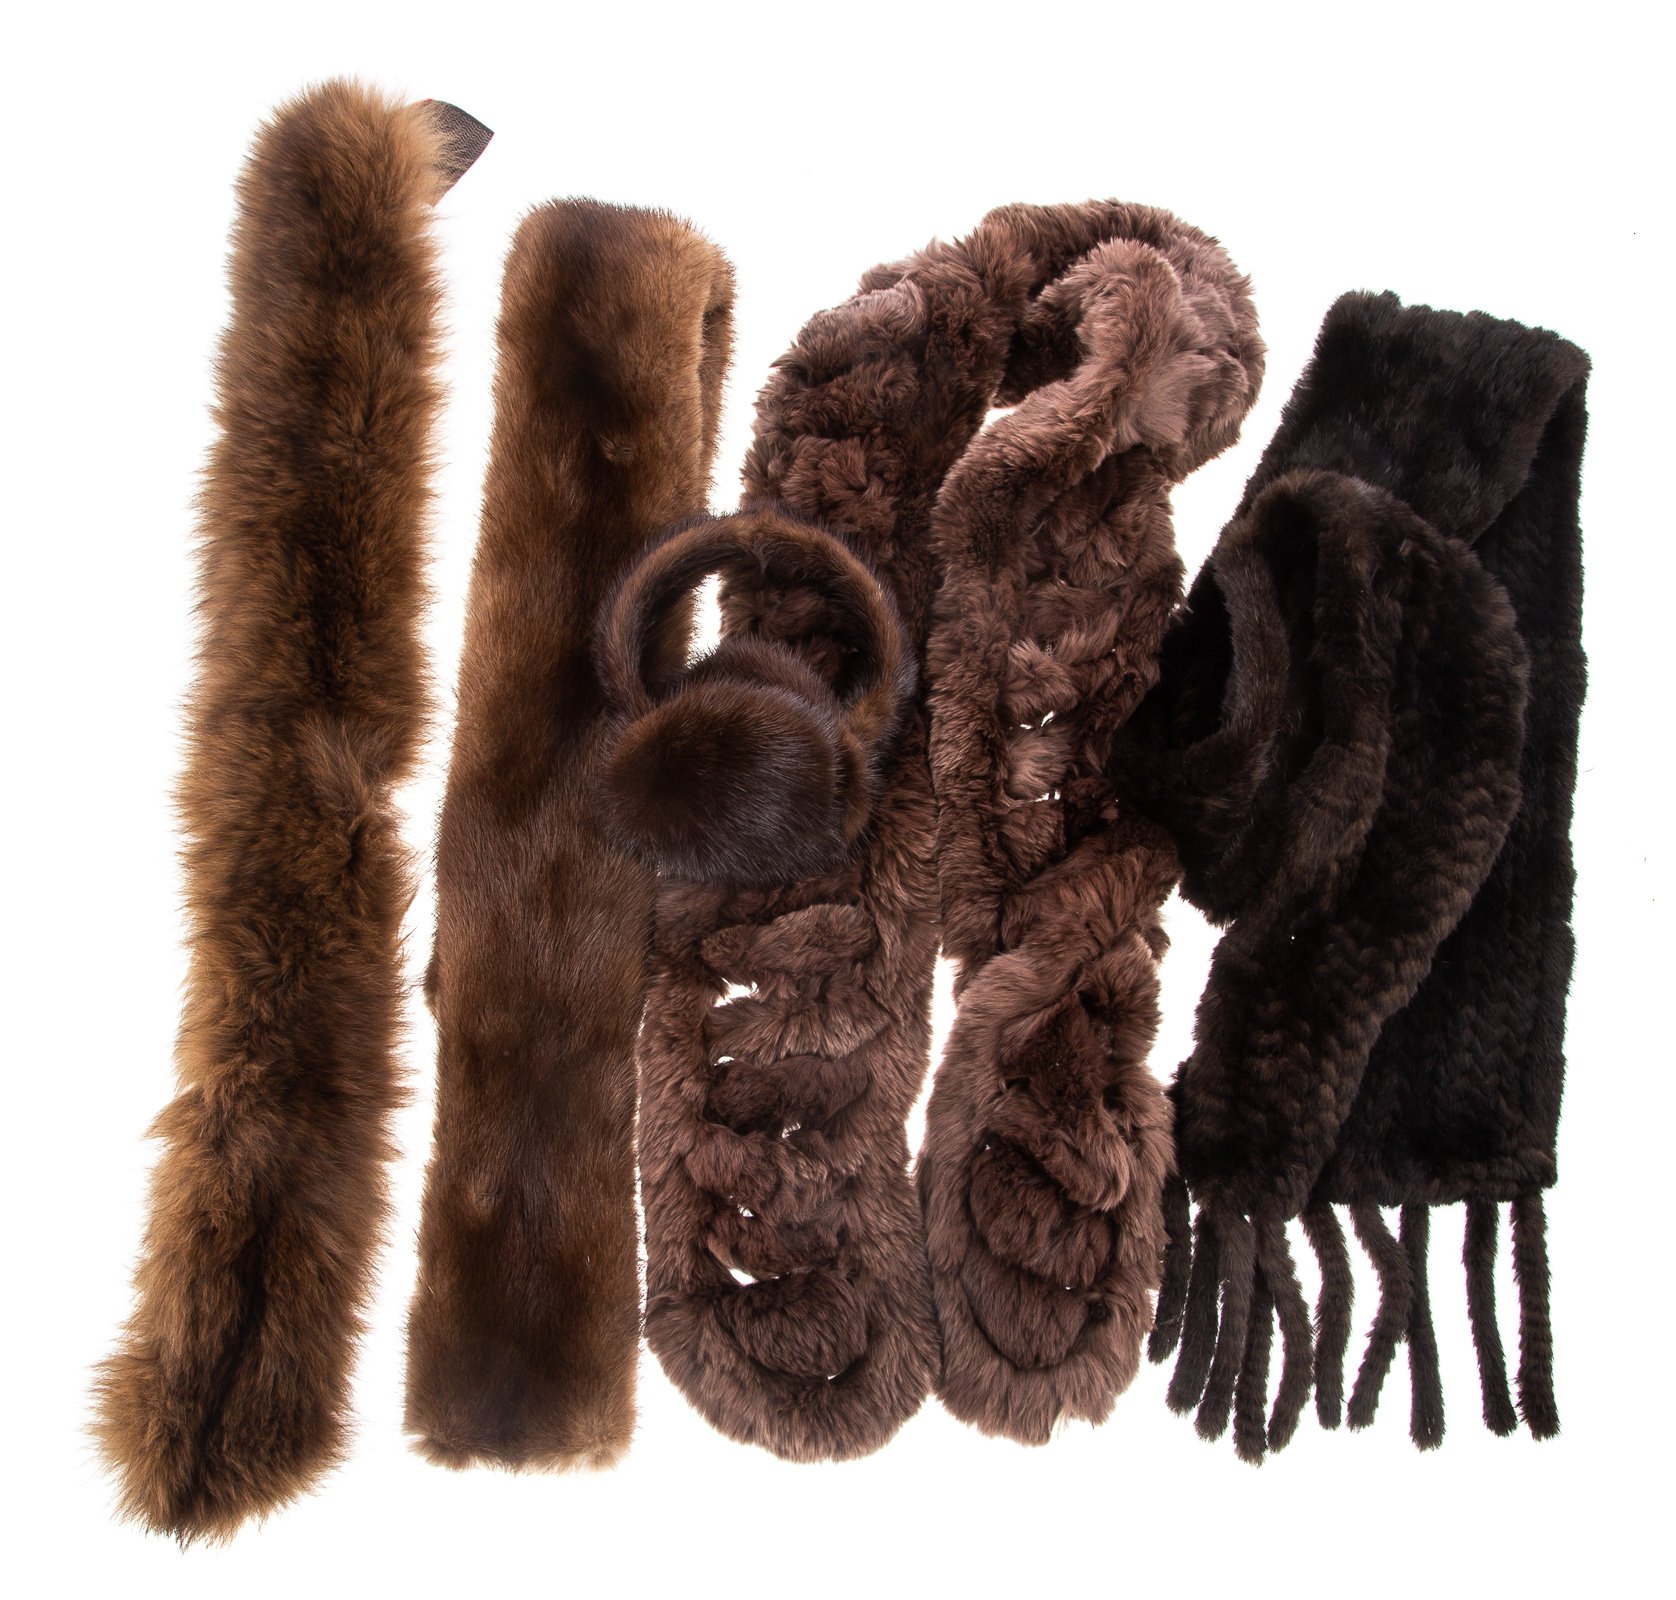 GROUP OF FUR ACCESSORIES including